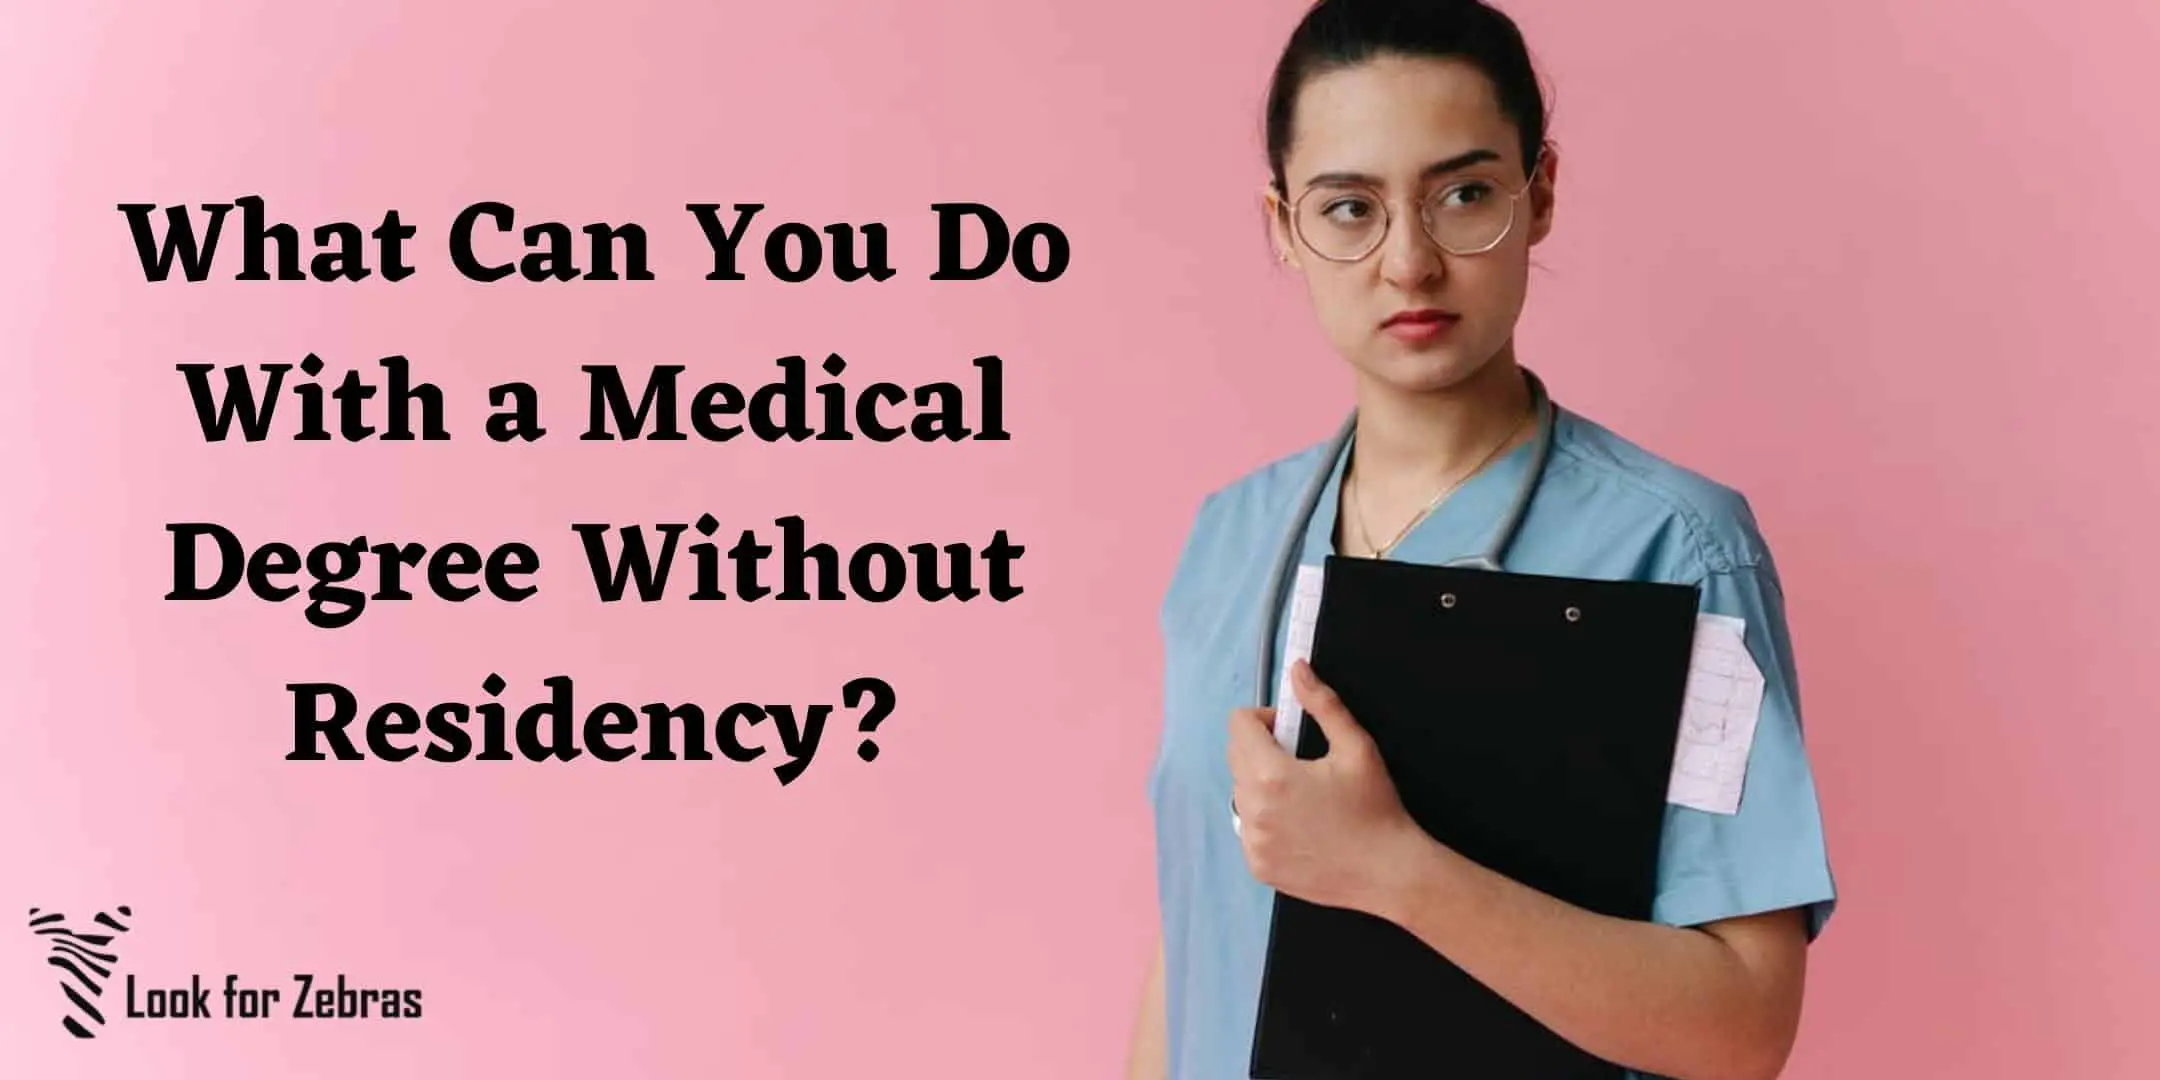 Medical degree without residency